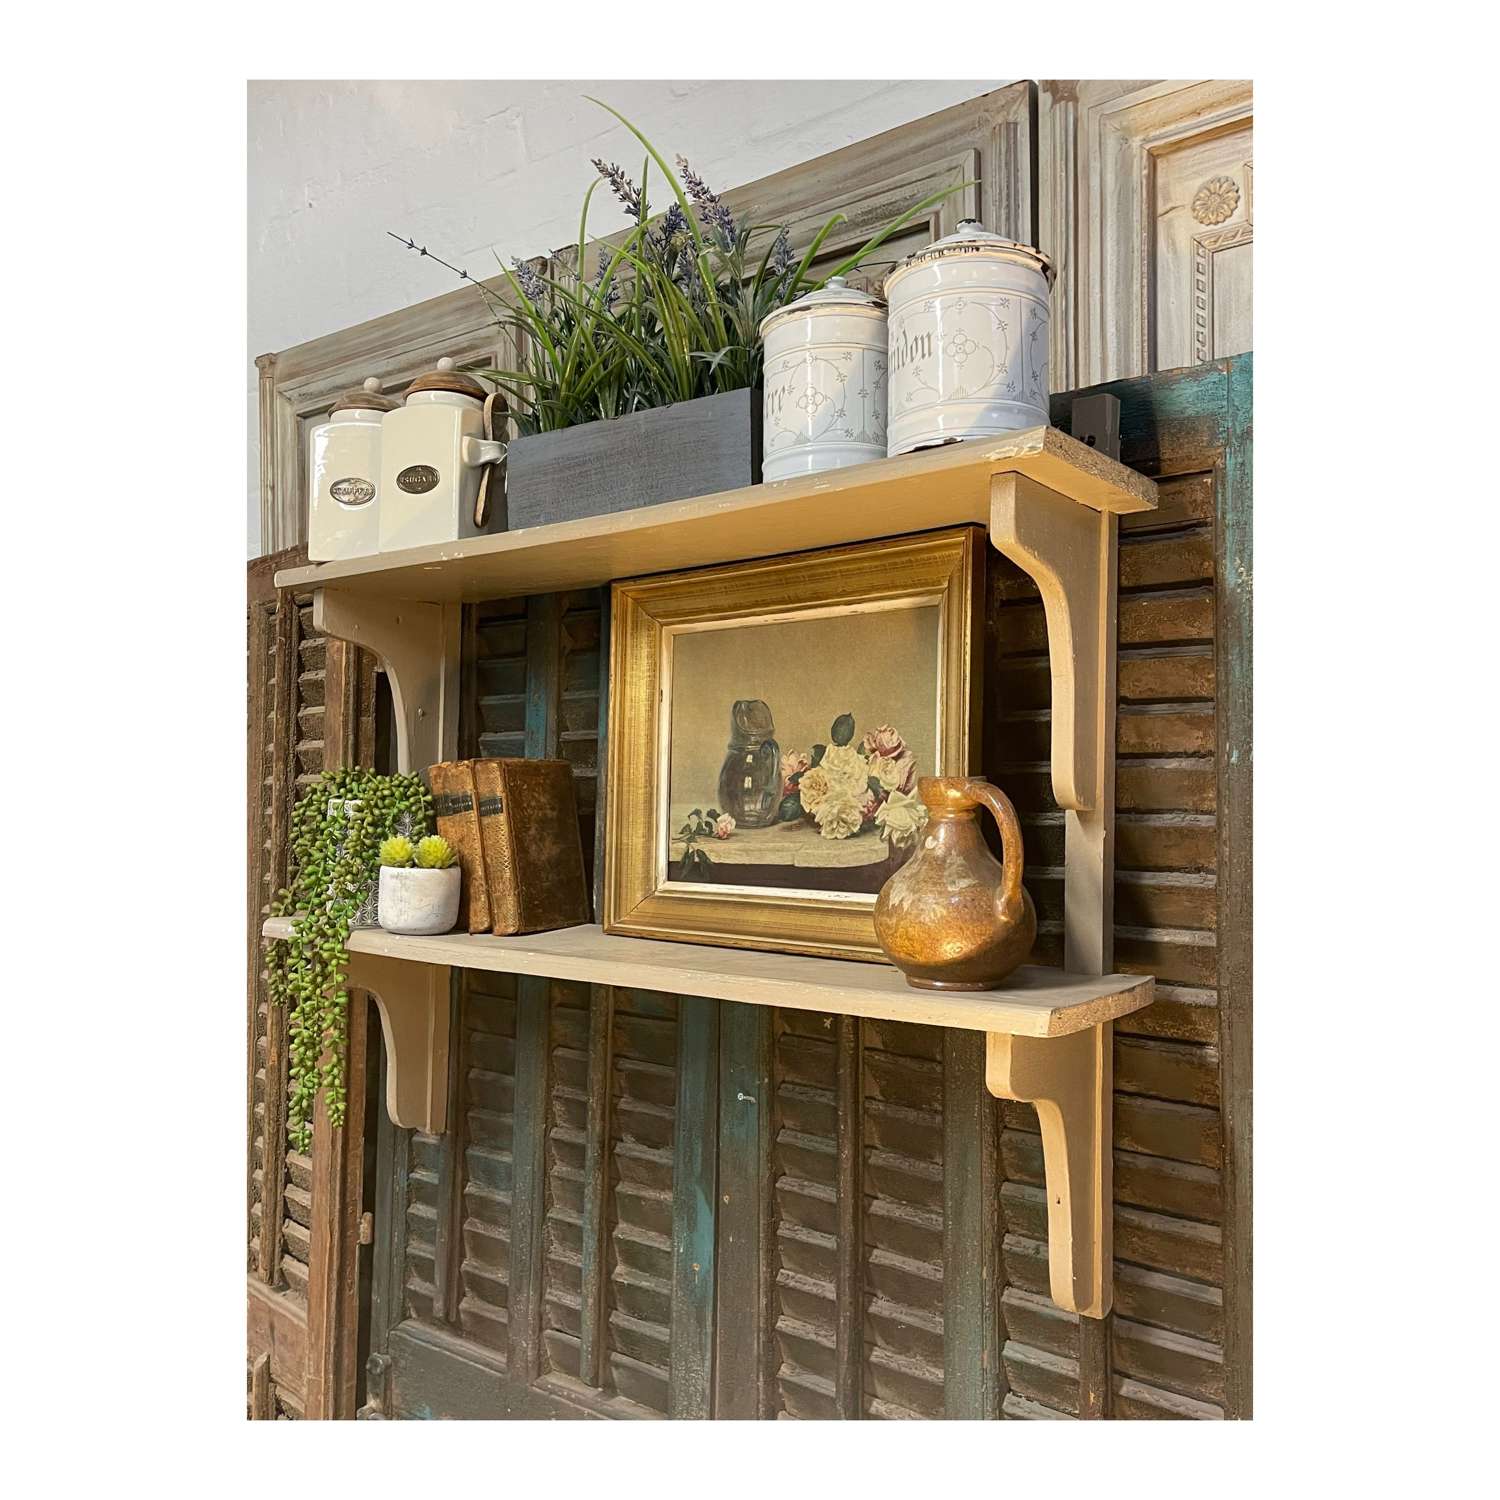 French painted country kitchen shelves